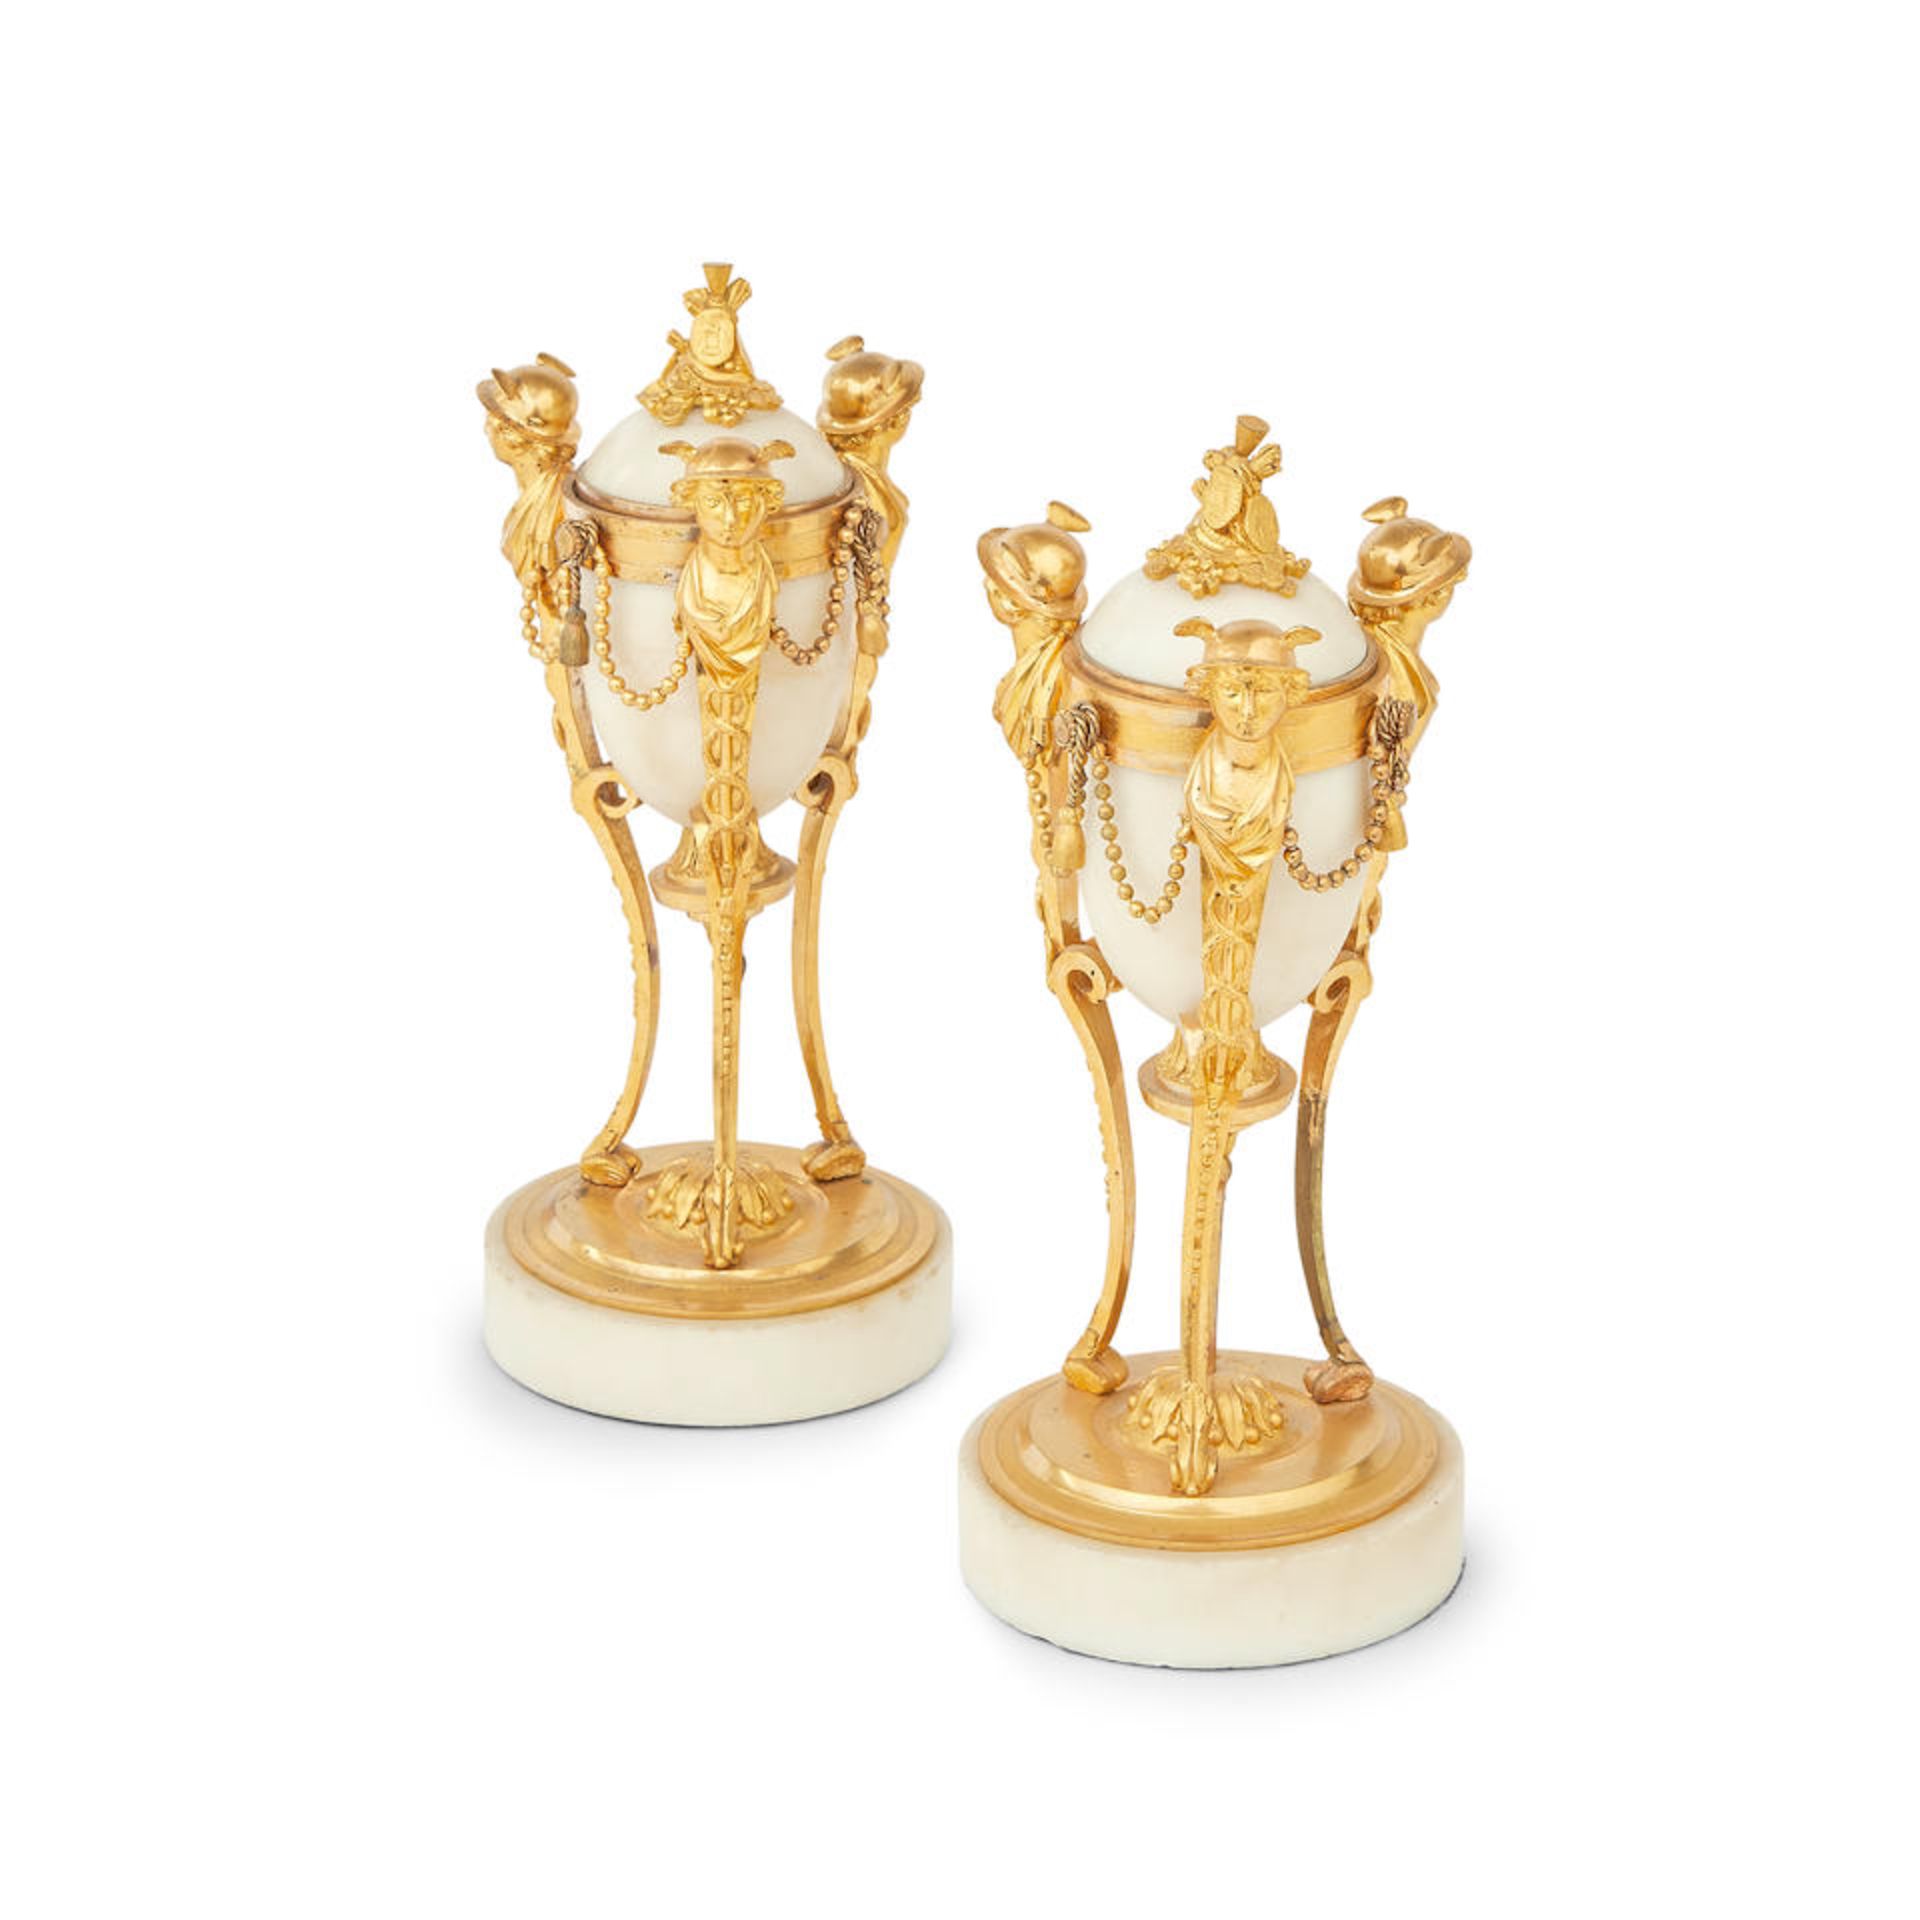 A pair of late Louis XVI ormolu and white marble cassolettes late 18th/early 19th century (2)